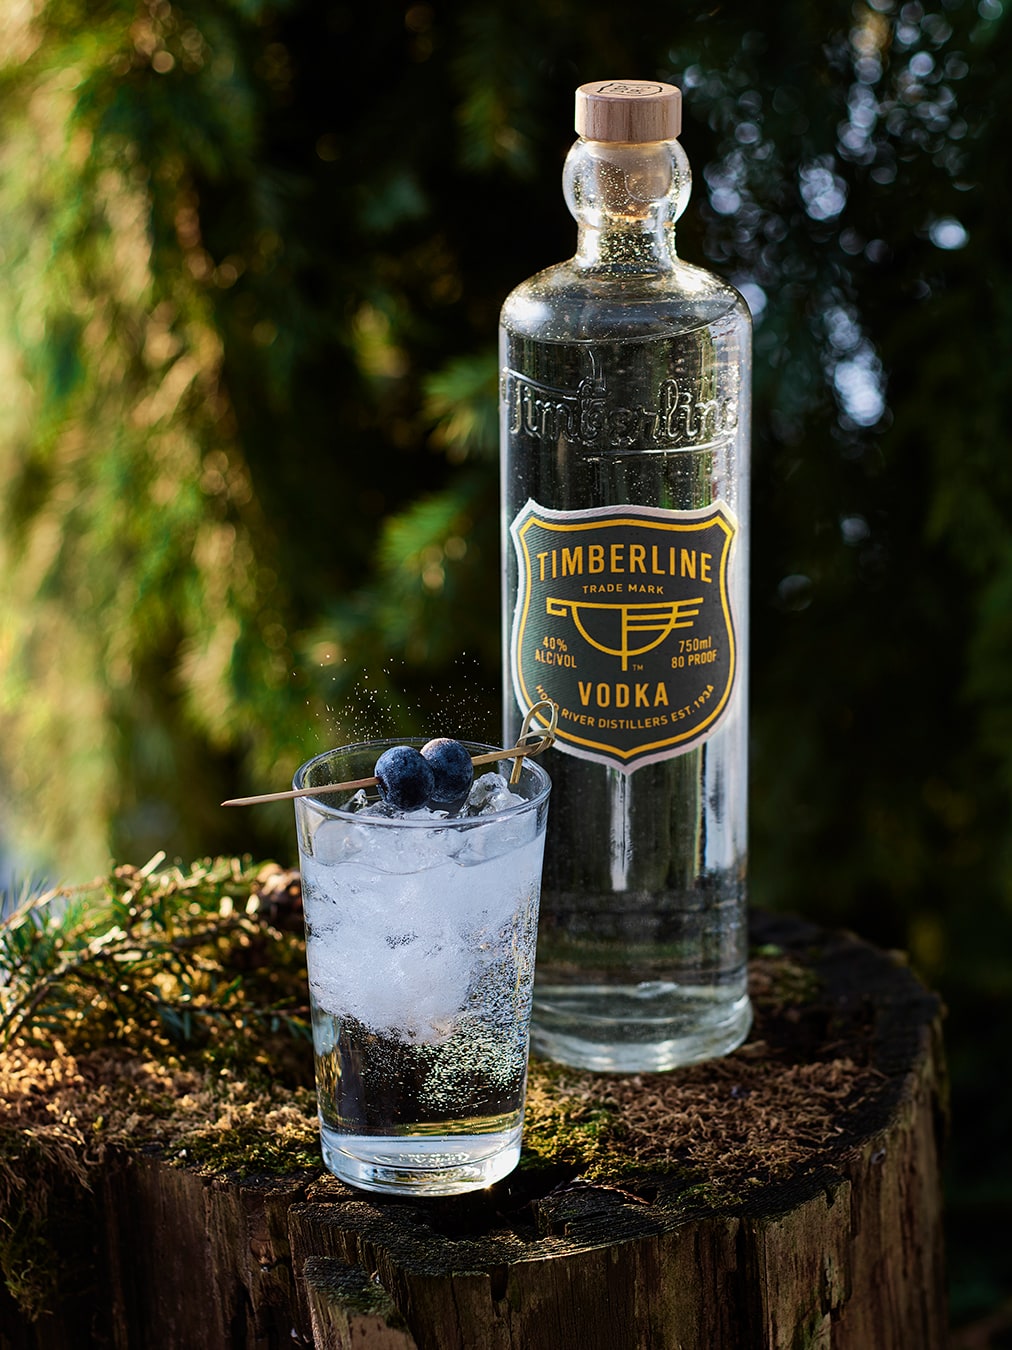 Timberline Vodka bottle and cocktail on stump